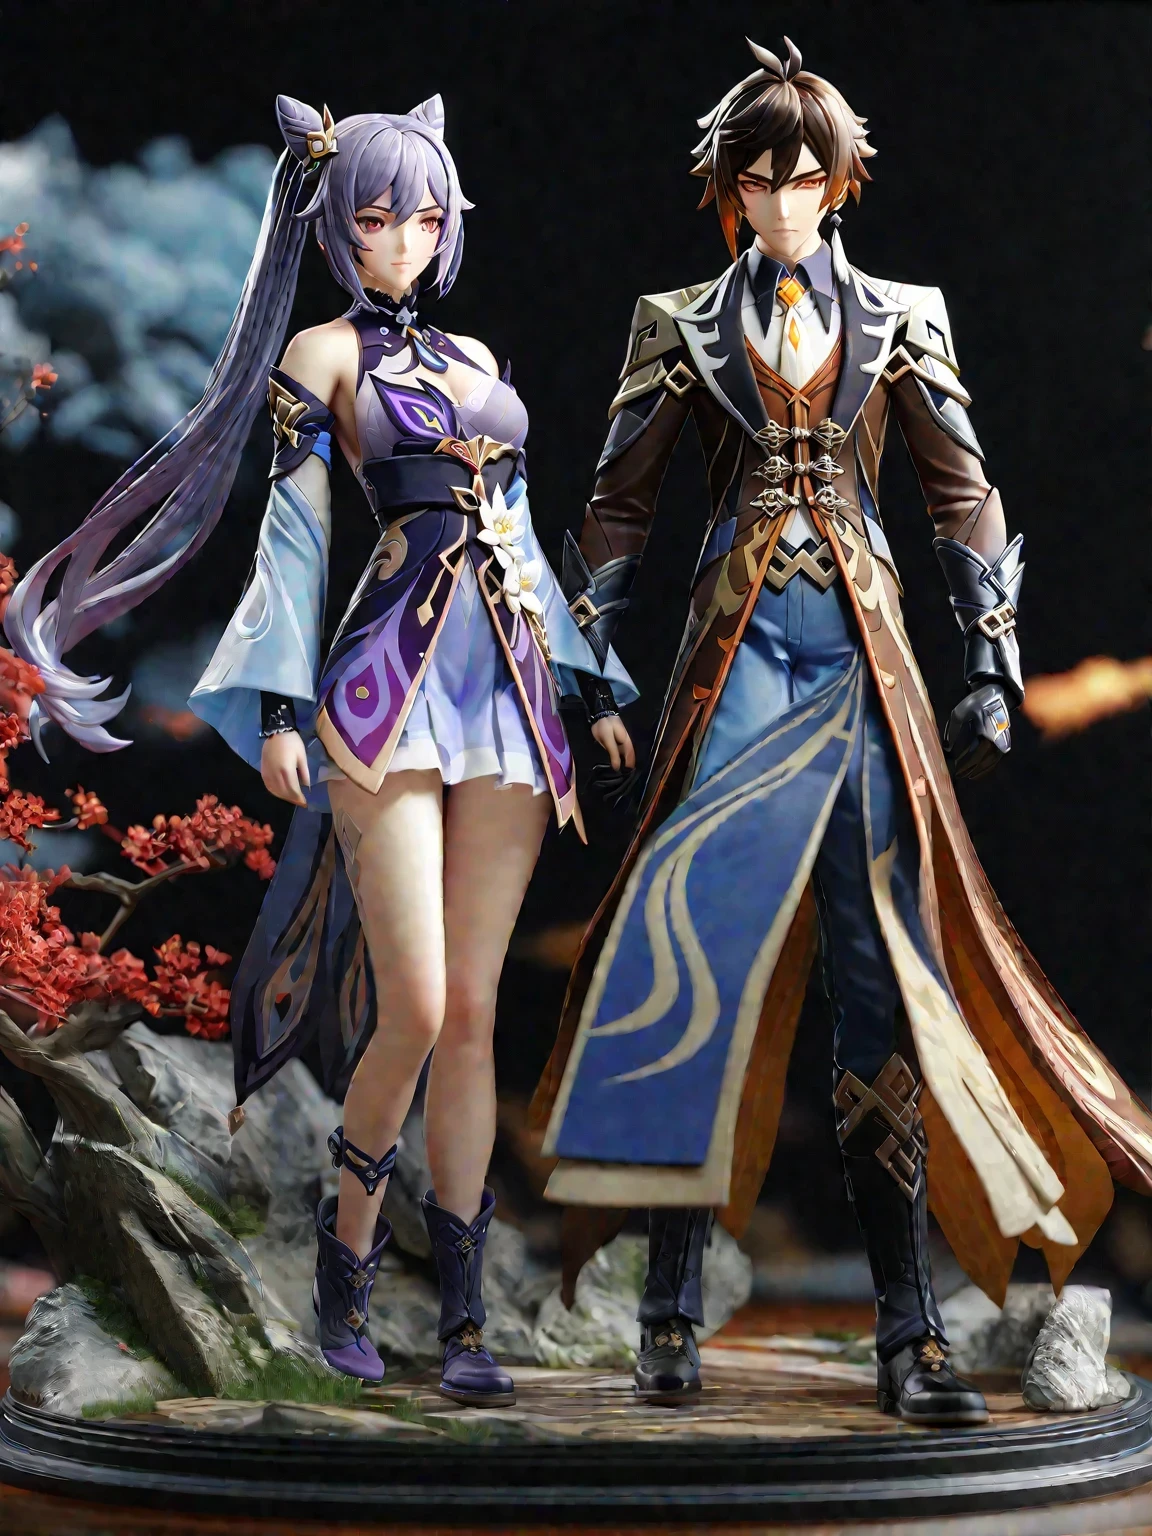 diy17，Highest quality, ultra-high definition, masterpieces, 8k, realistic, anime styled, 3d render，araffe statue of a woman with blue hair and a blue dress, keqing from genshin impact, 3 d render character art 8 k, 8k high quality detailed art, zhongli from genshin impact, anime figurine, ( highly detailed figure ), anime highly detailed, game cg, 8k octae render photo, super highly detailed